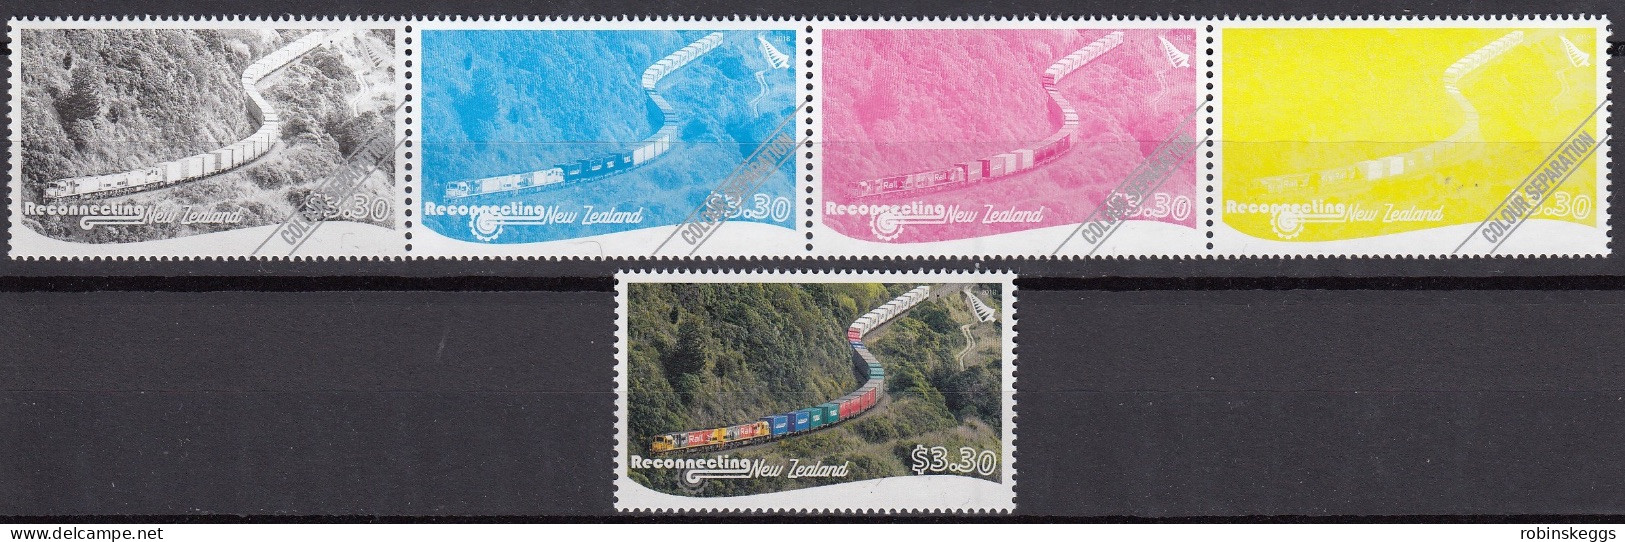 NEW ZEALAND 2018 Reconnecting NZ 2050, $3.30 Colour Separation Proof MNH - Other (Earth)